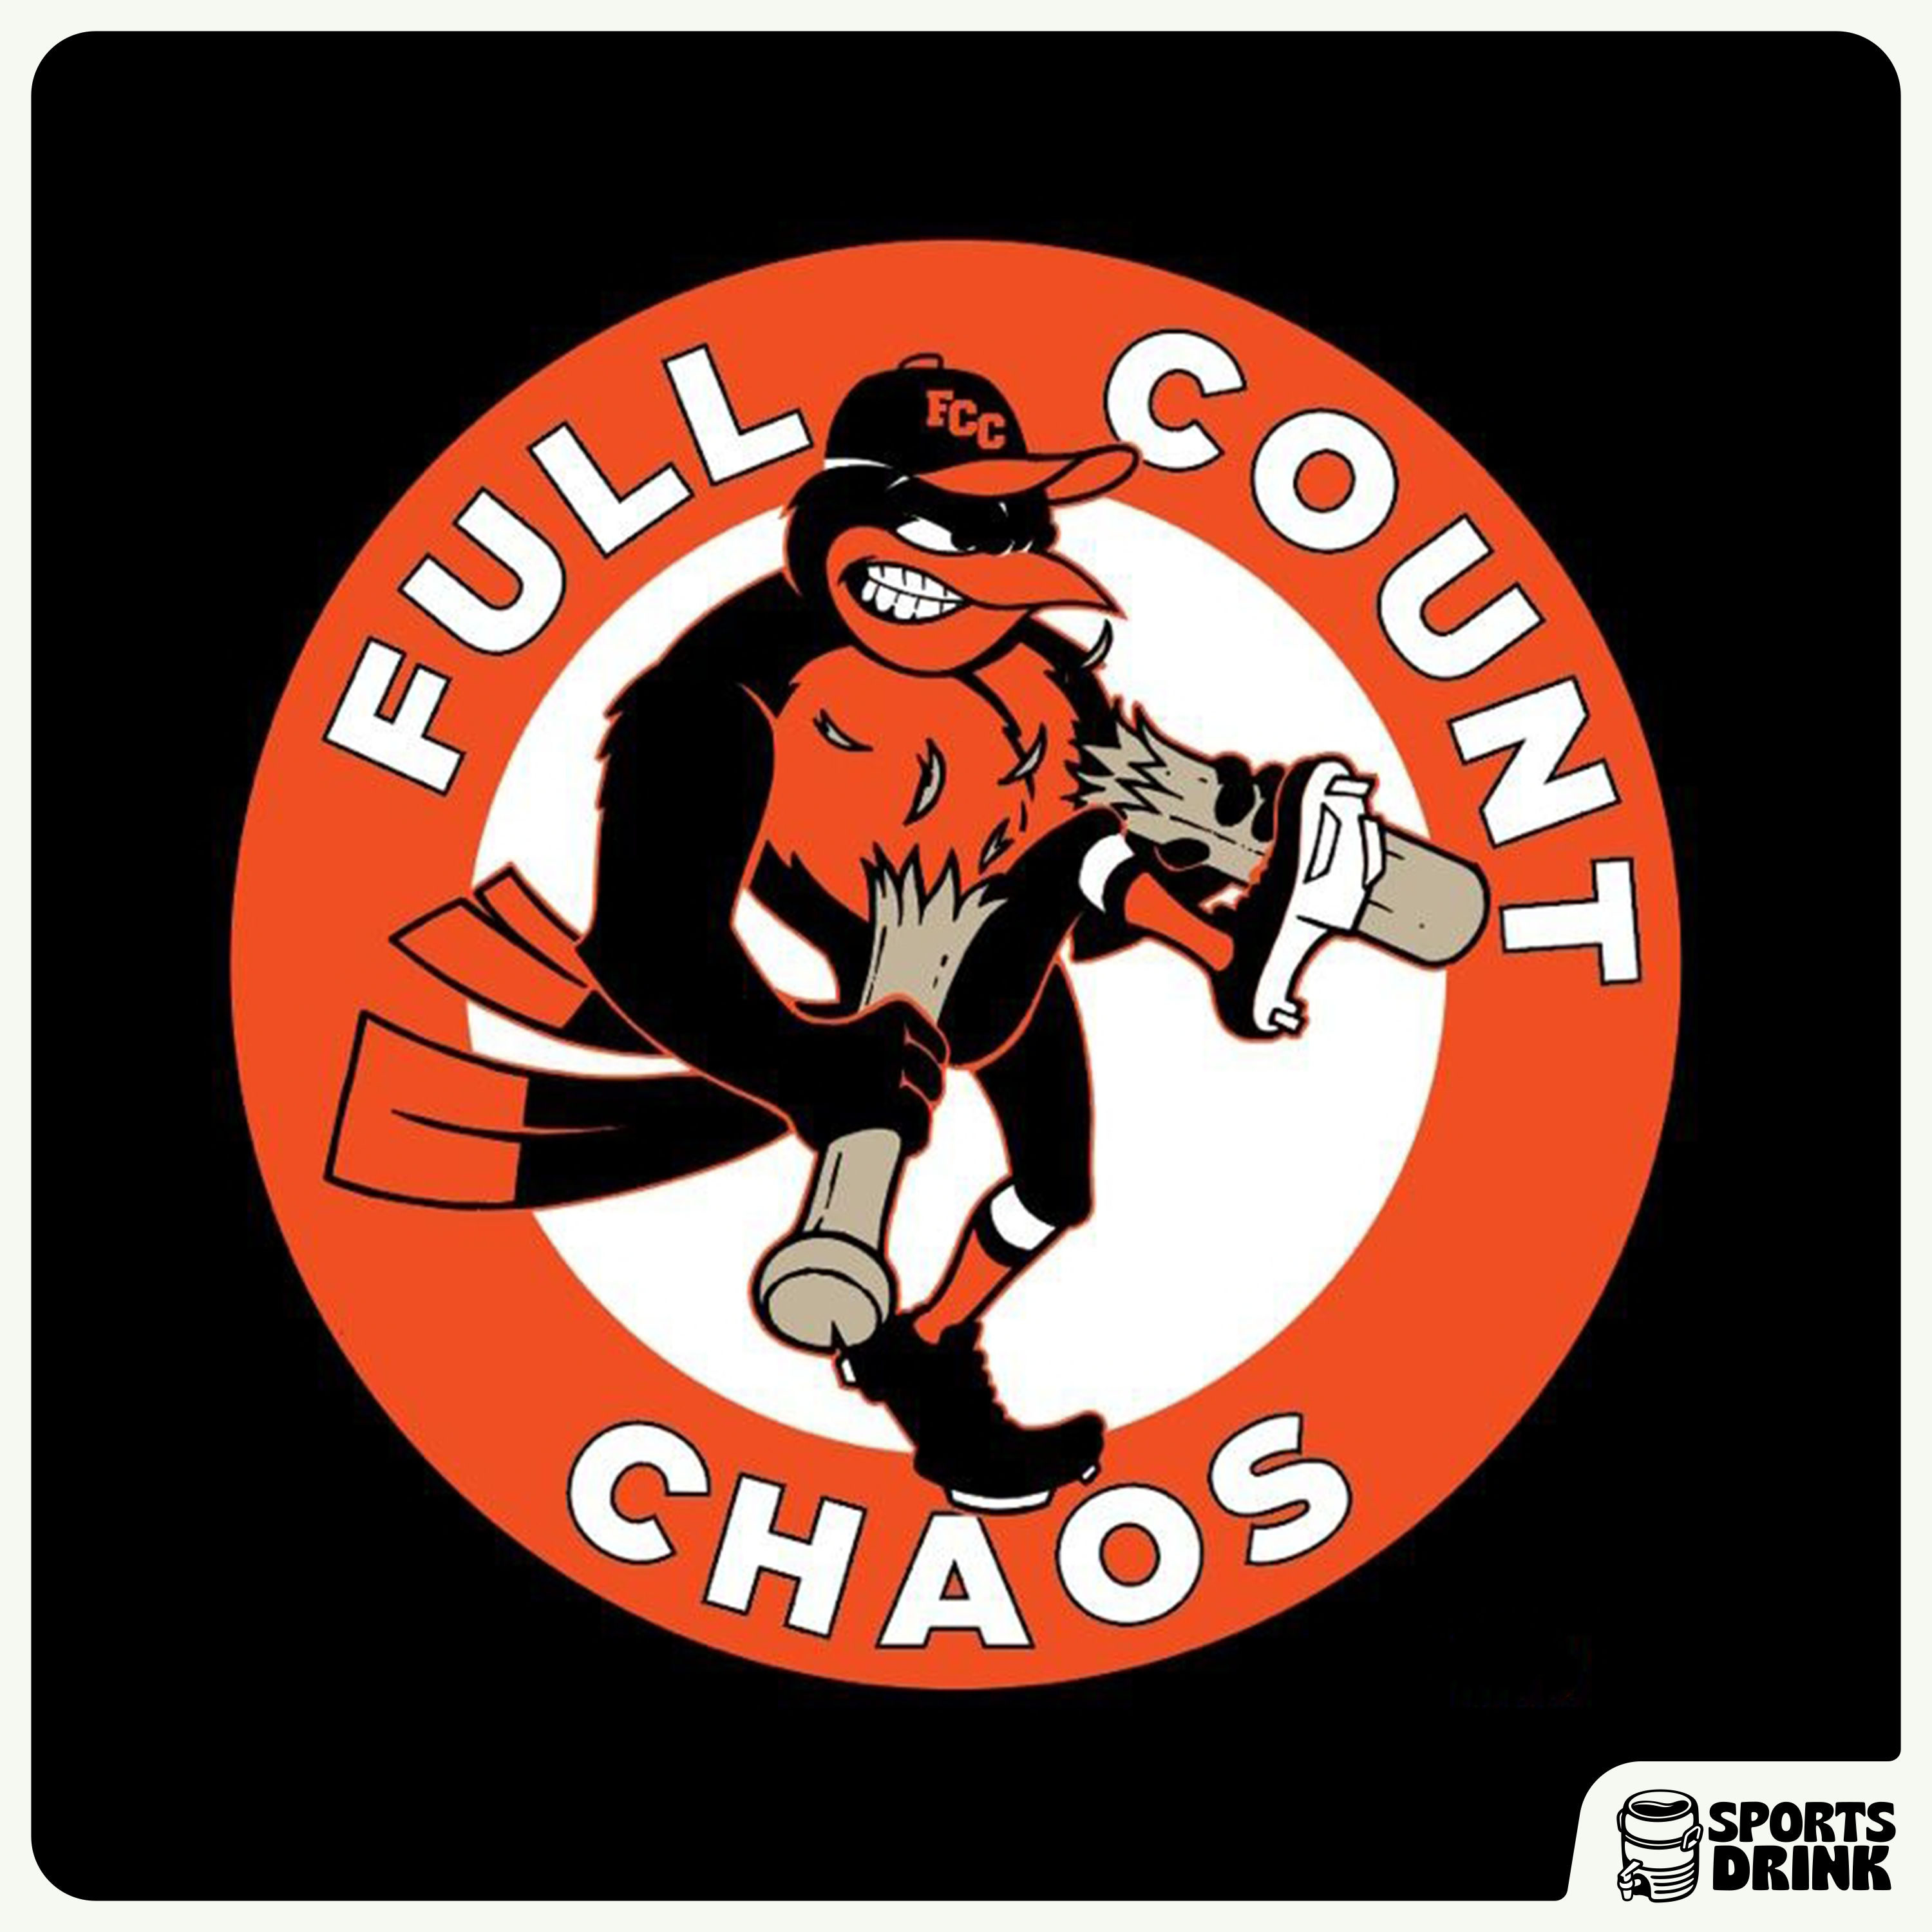 Full Count Chaos